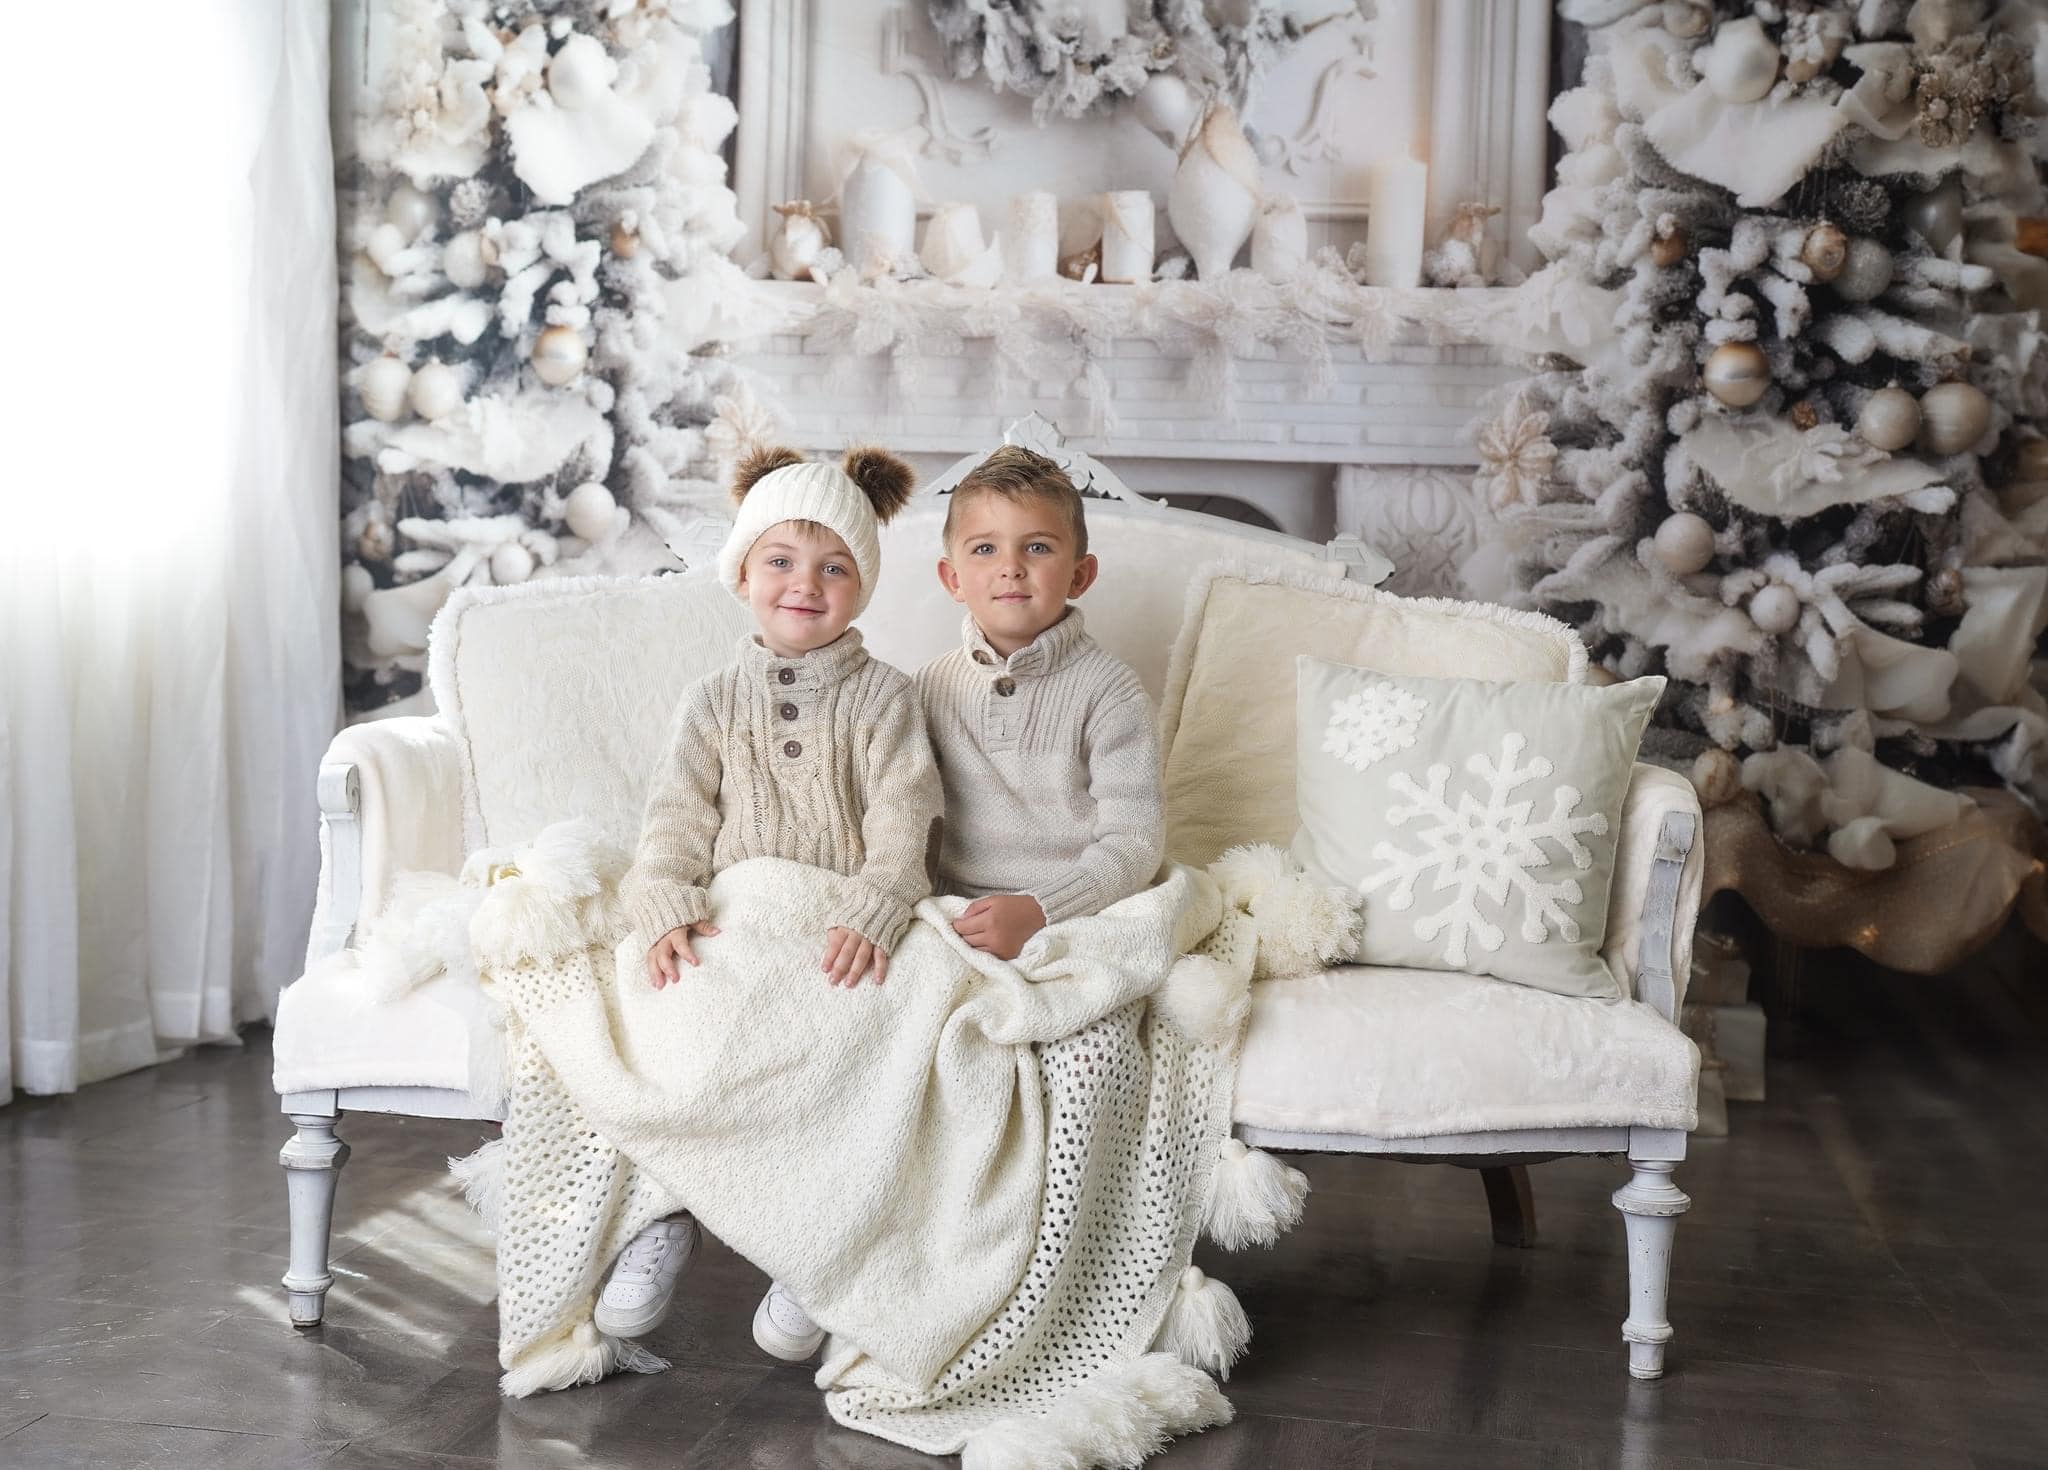 Kate Christmas Elegant Room Fireplace Backdrop for Photography